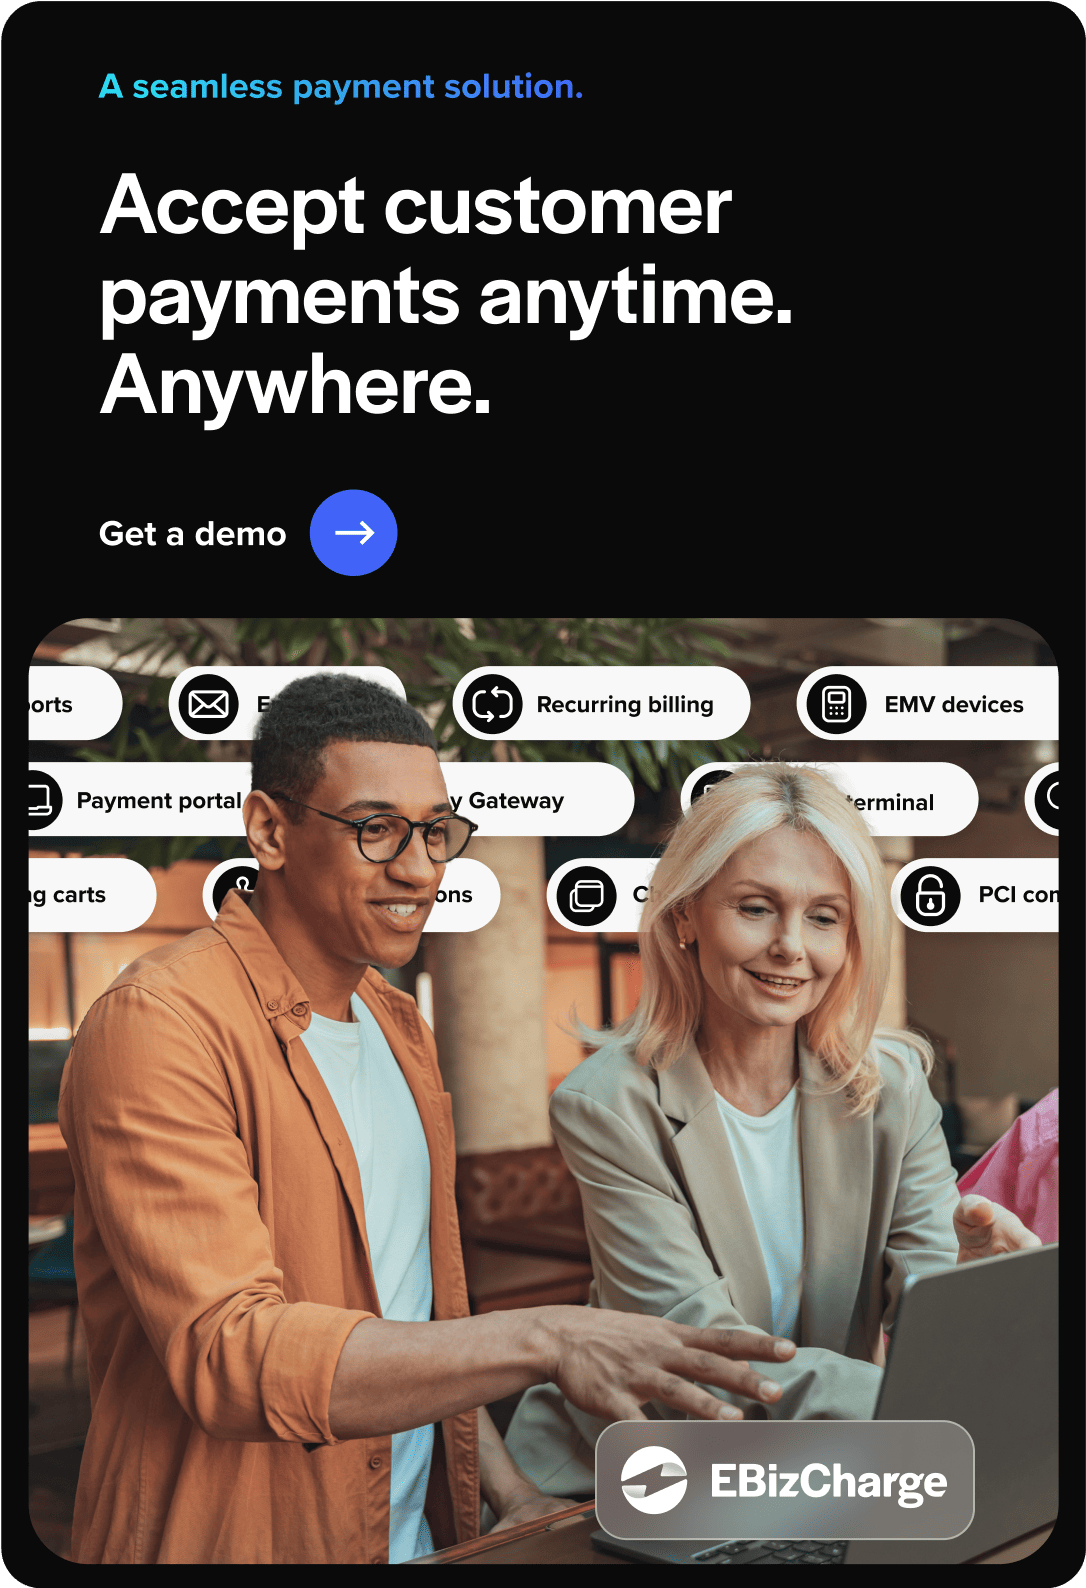 Accept payments anytime. anywhere with EBizCharge